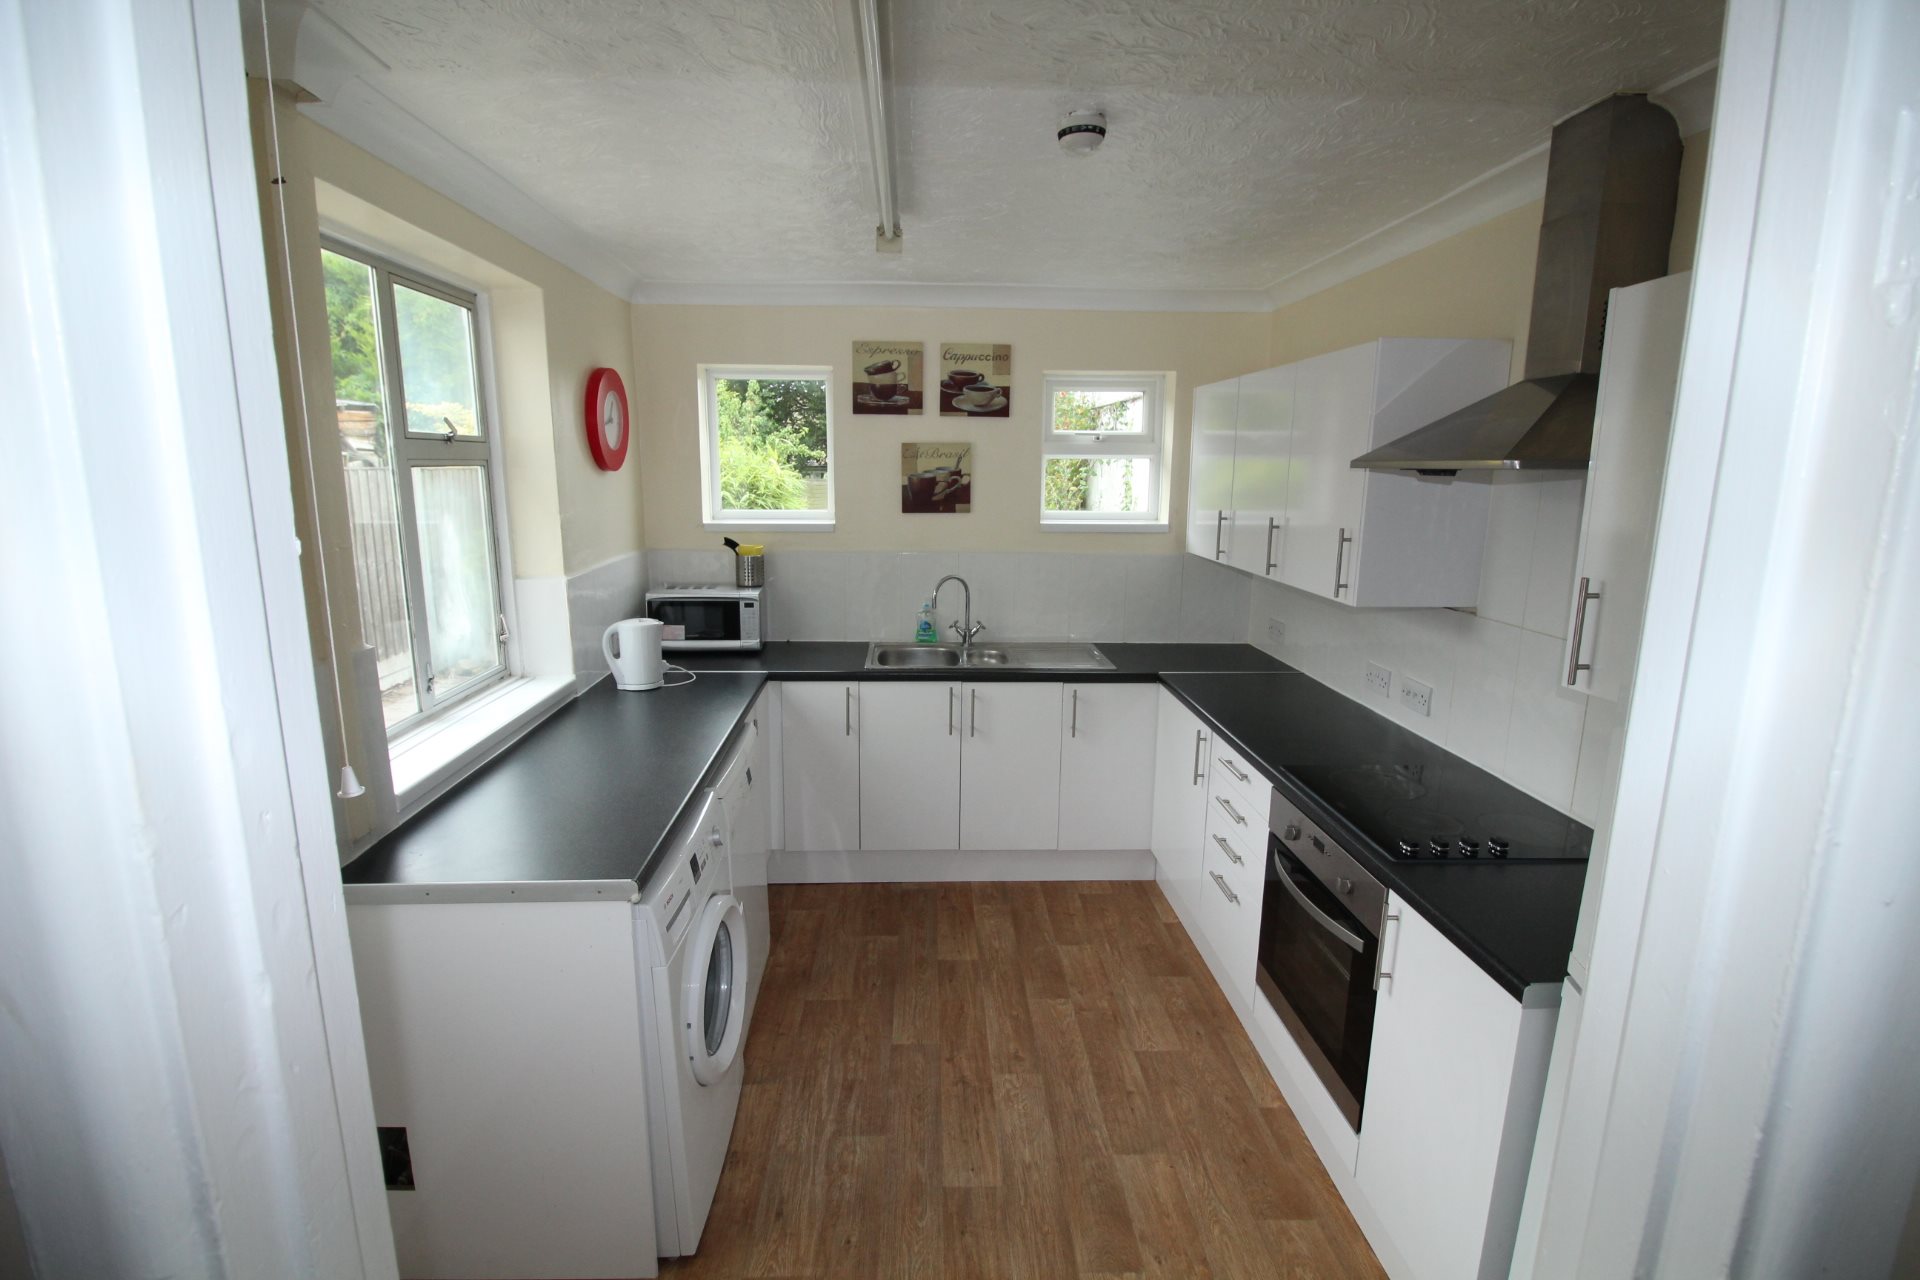 1 bed house / flat share to rent in Goring Road, Colchester  - Property Image 3